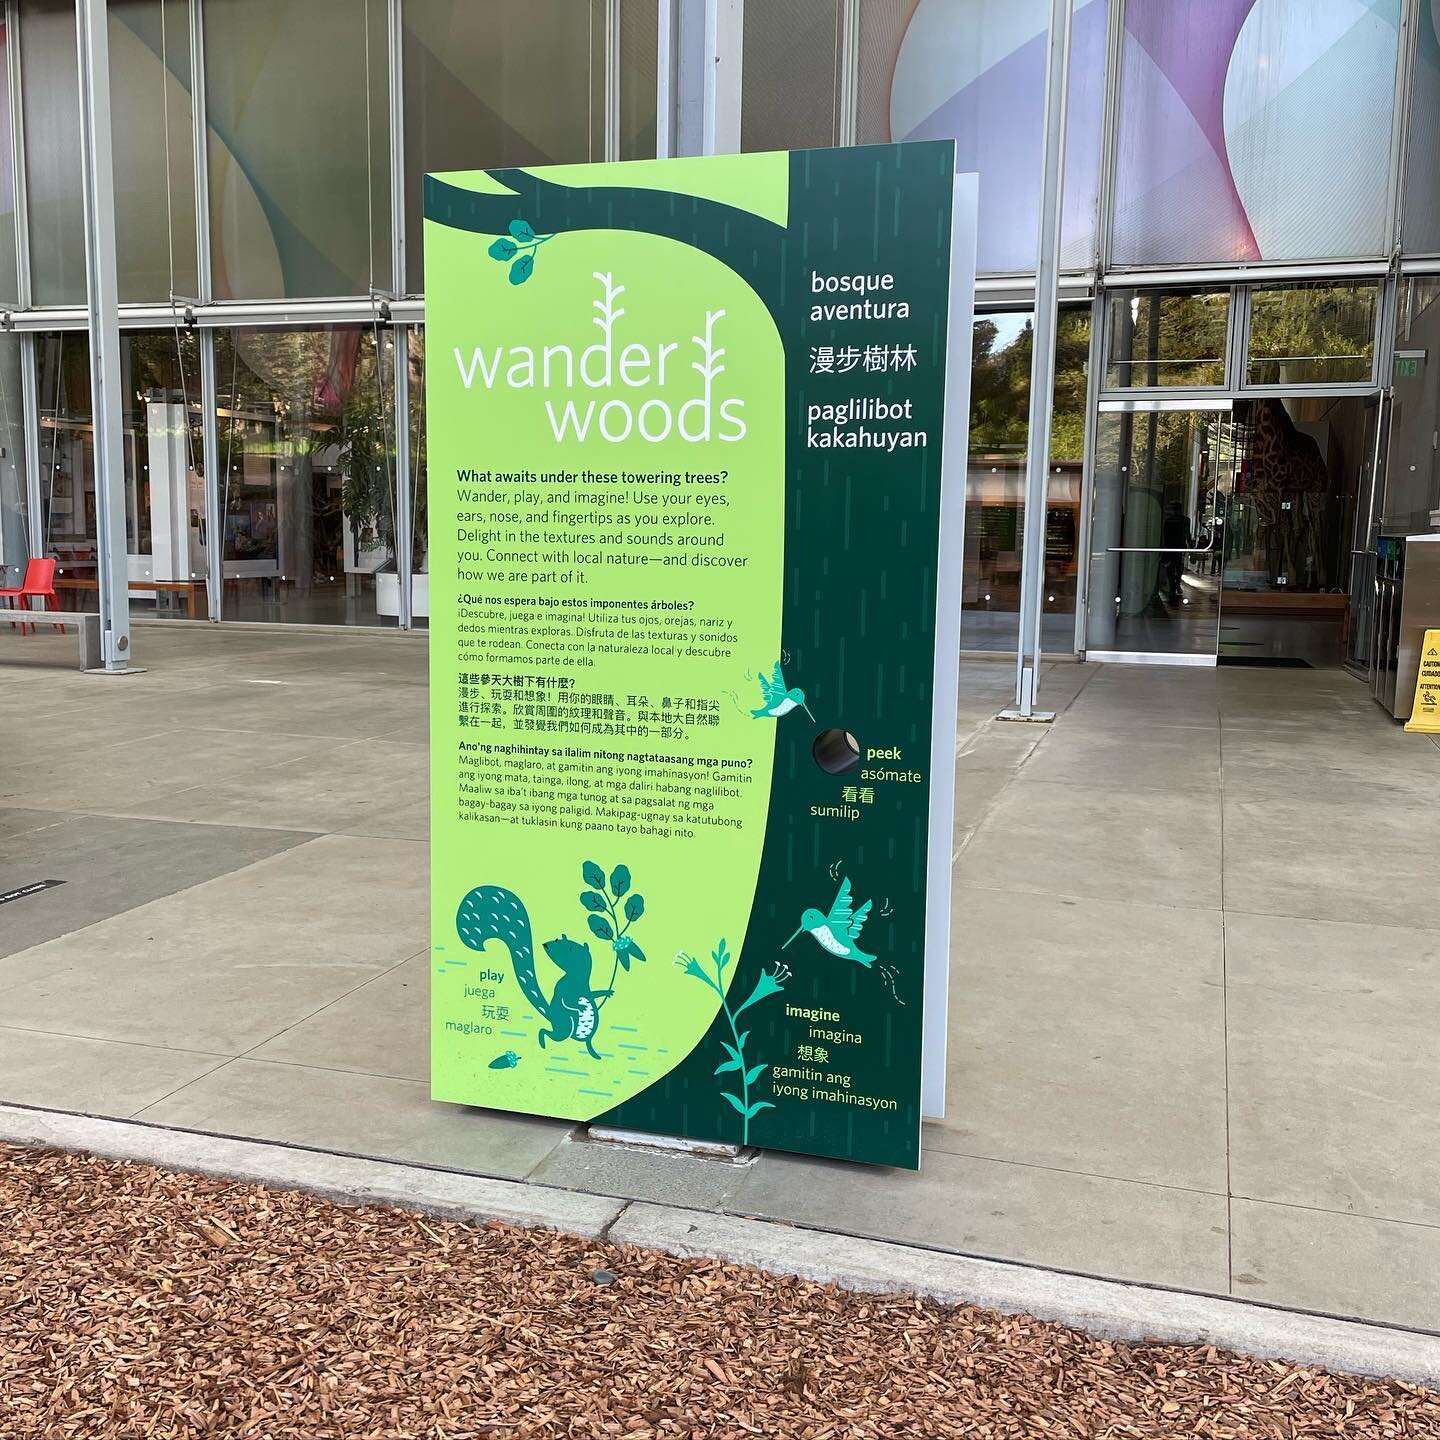 Wander Woods is now open in the East Garden! Here&rsquo;s a look at some of the supporting graphics we produced and installed.